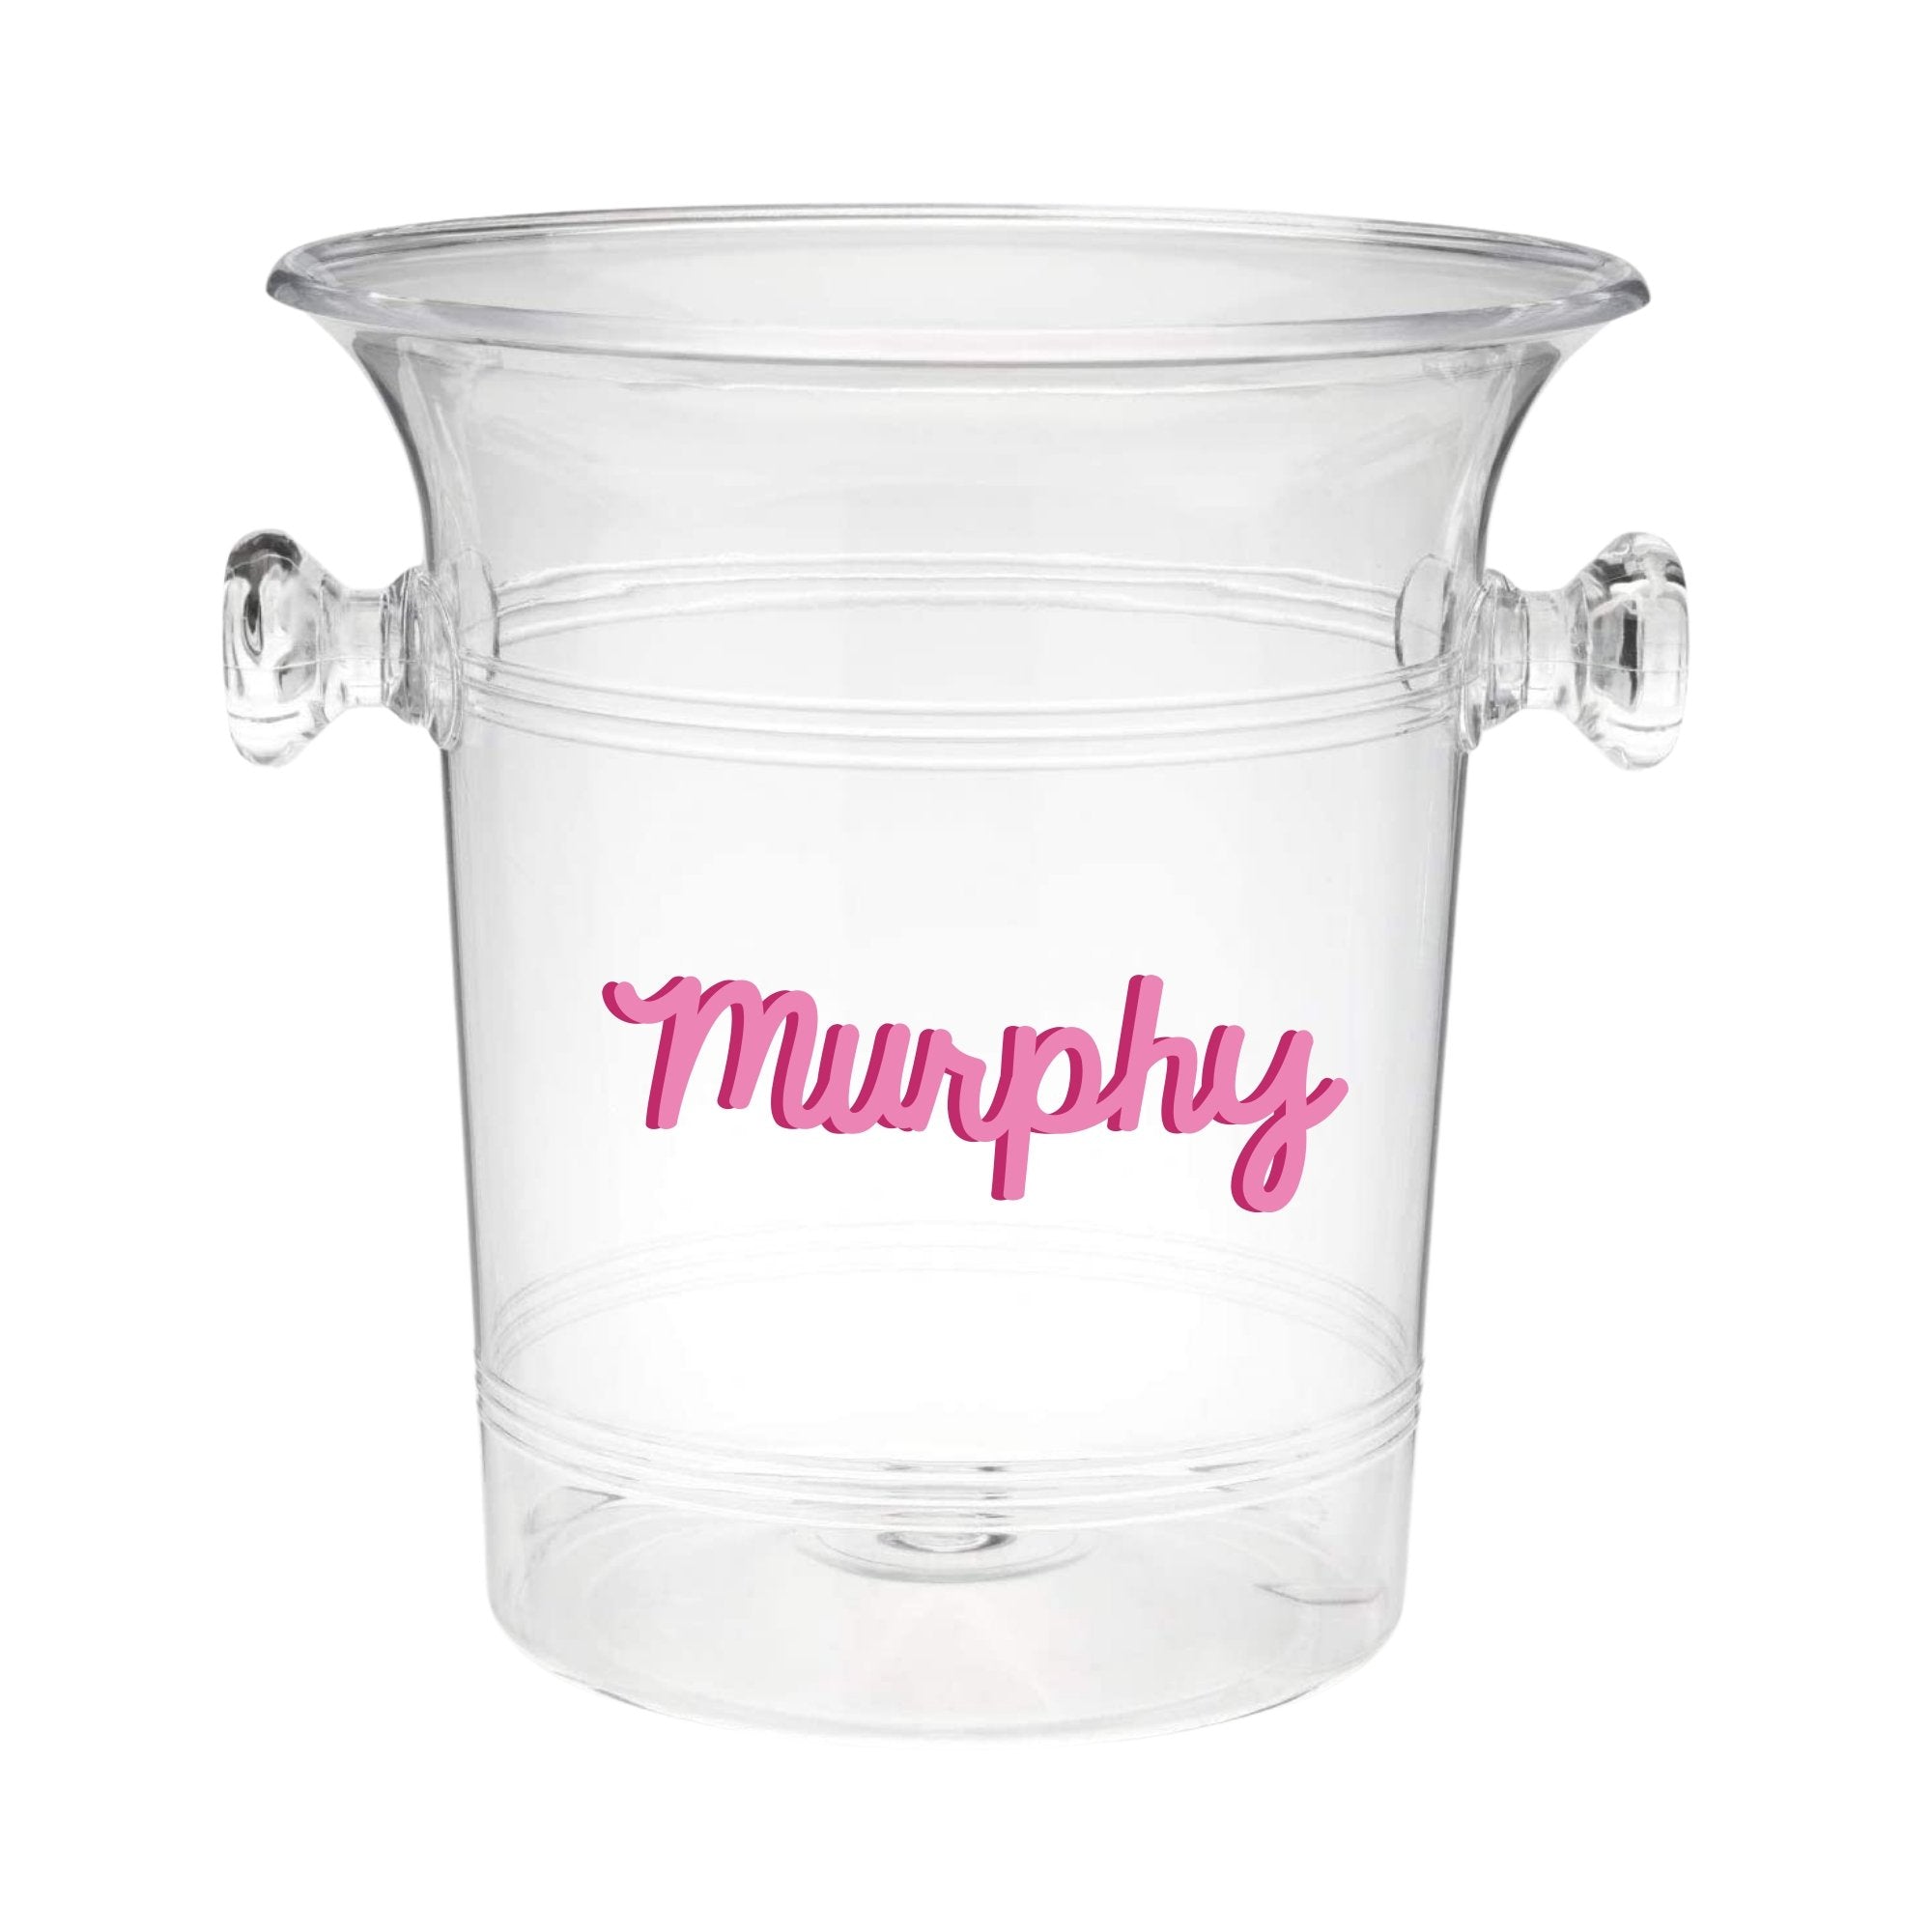 A clear ice bucket with "Murphy" on the front in pink cursive